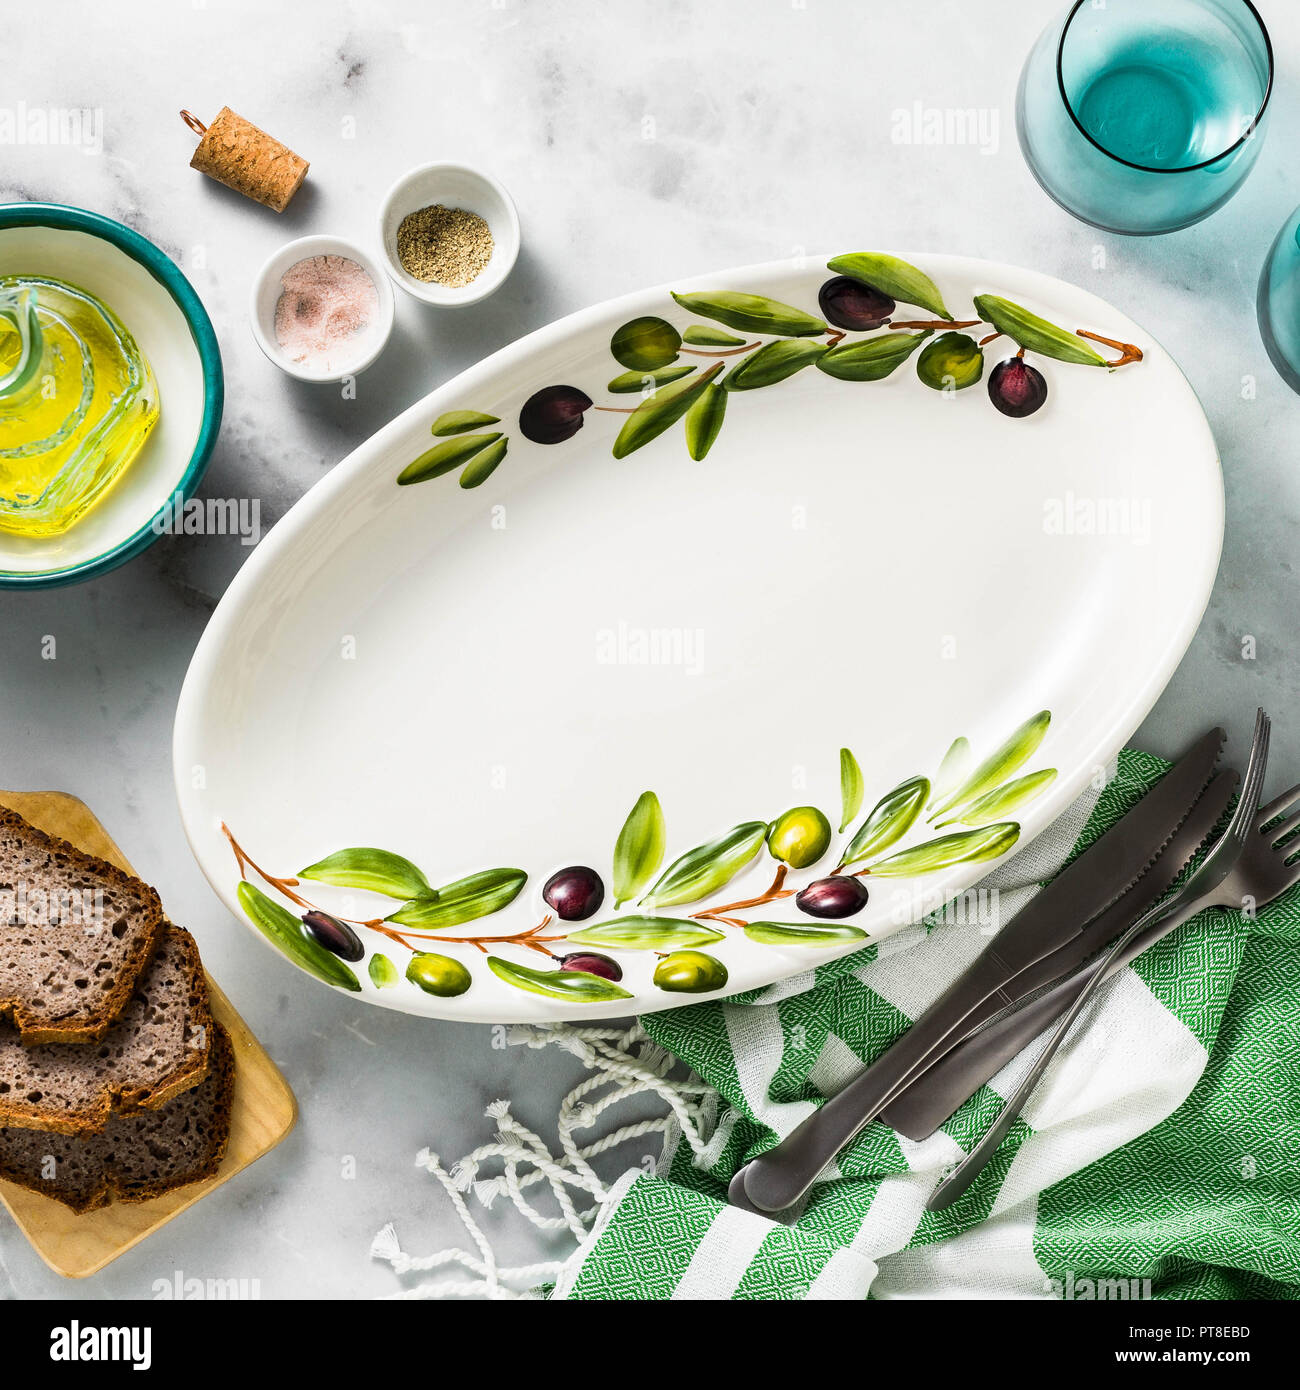 Empty handmade oval dish with olive tree branches on a white marble table. olive oil and cutlery. Mediterranean table setting Stock Photo